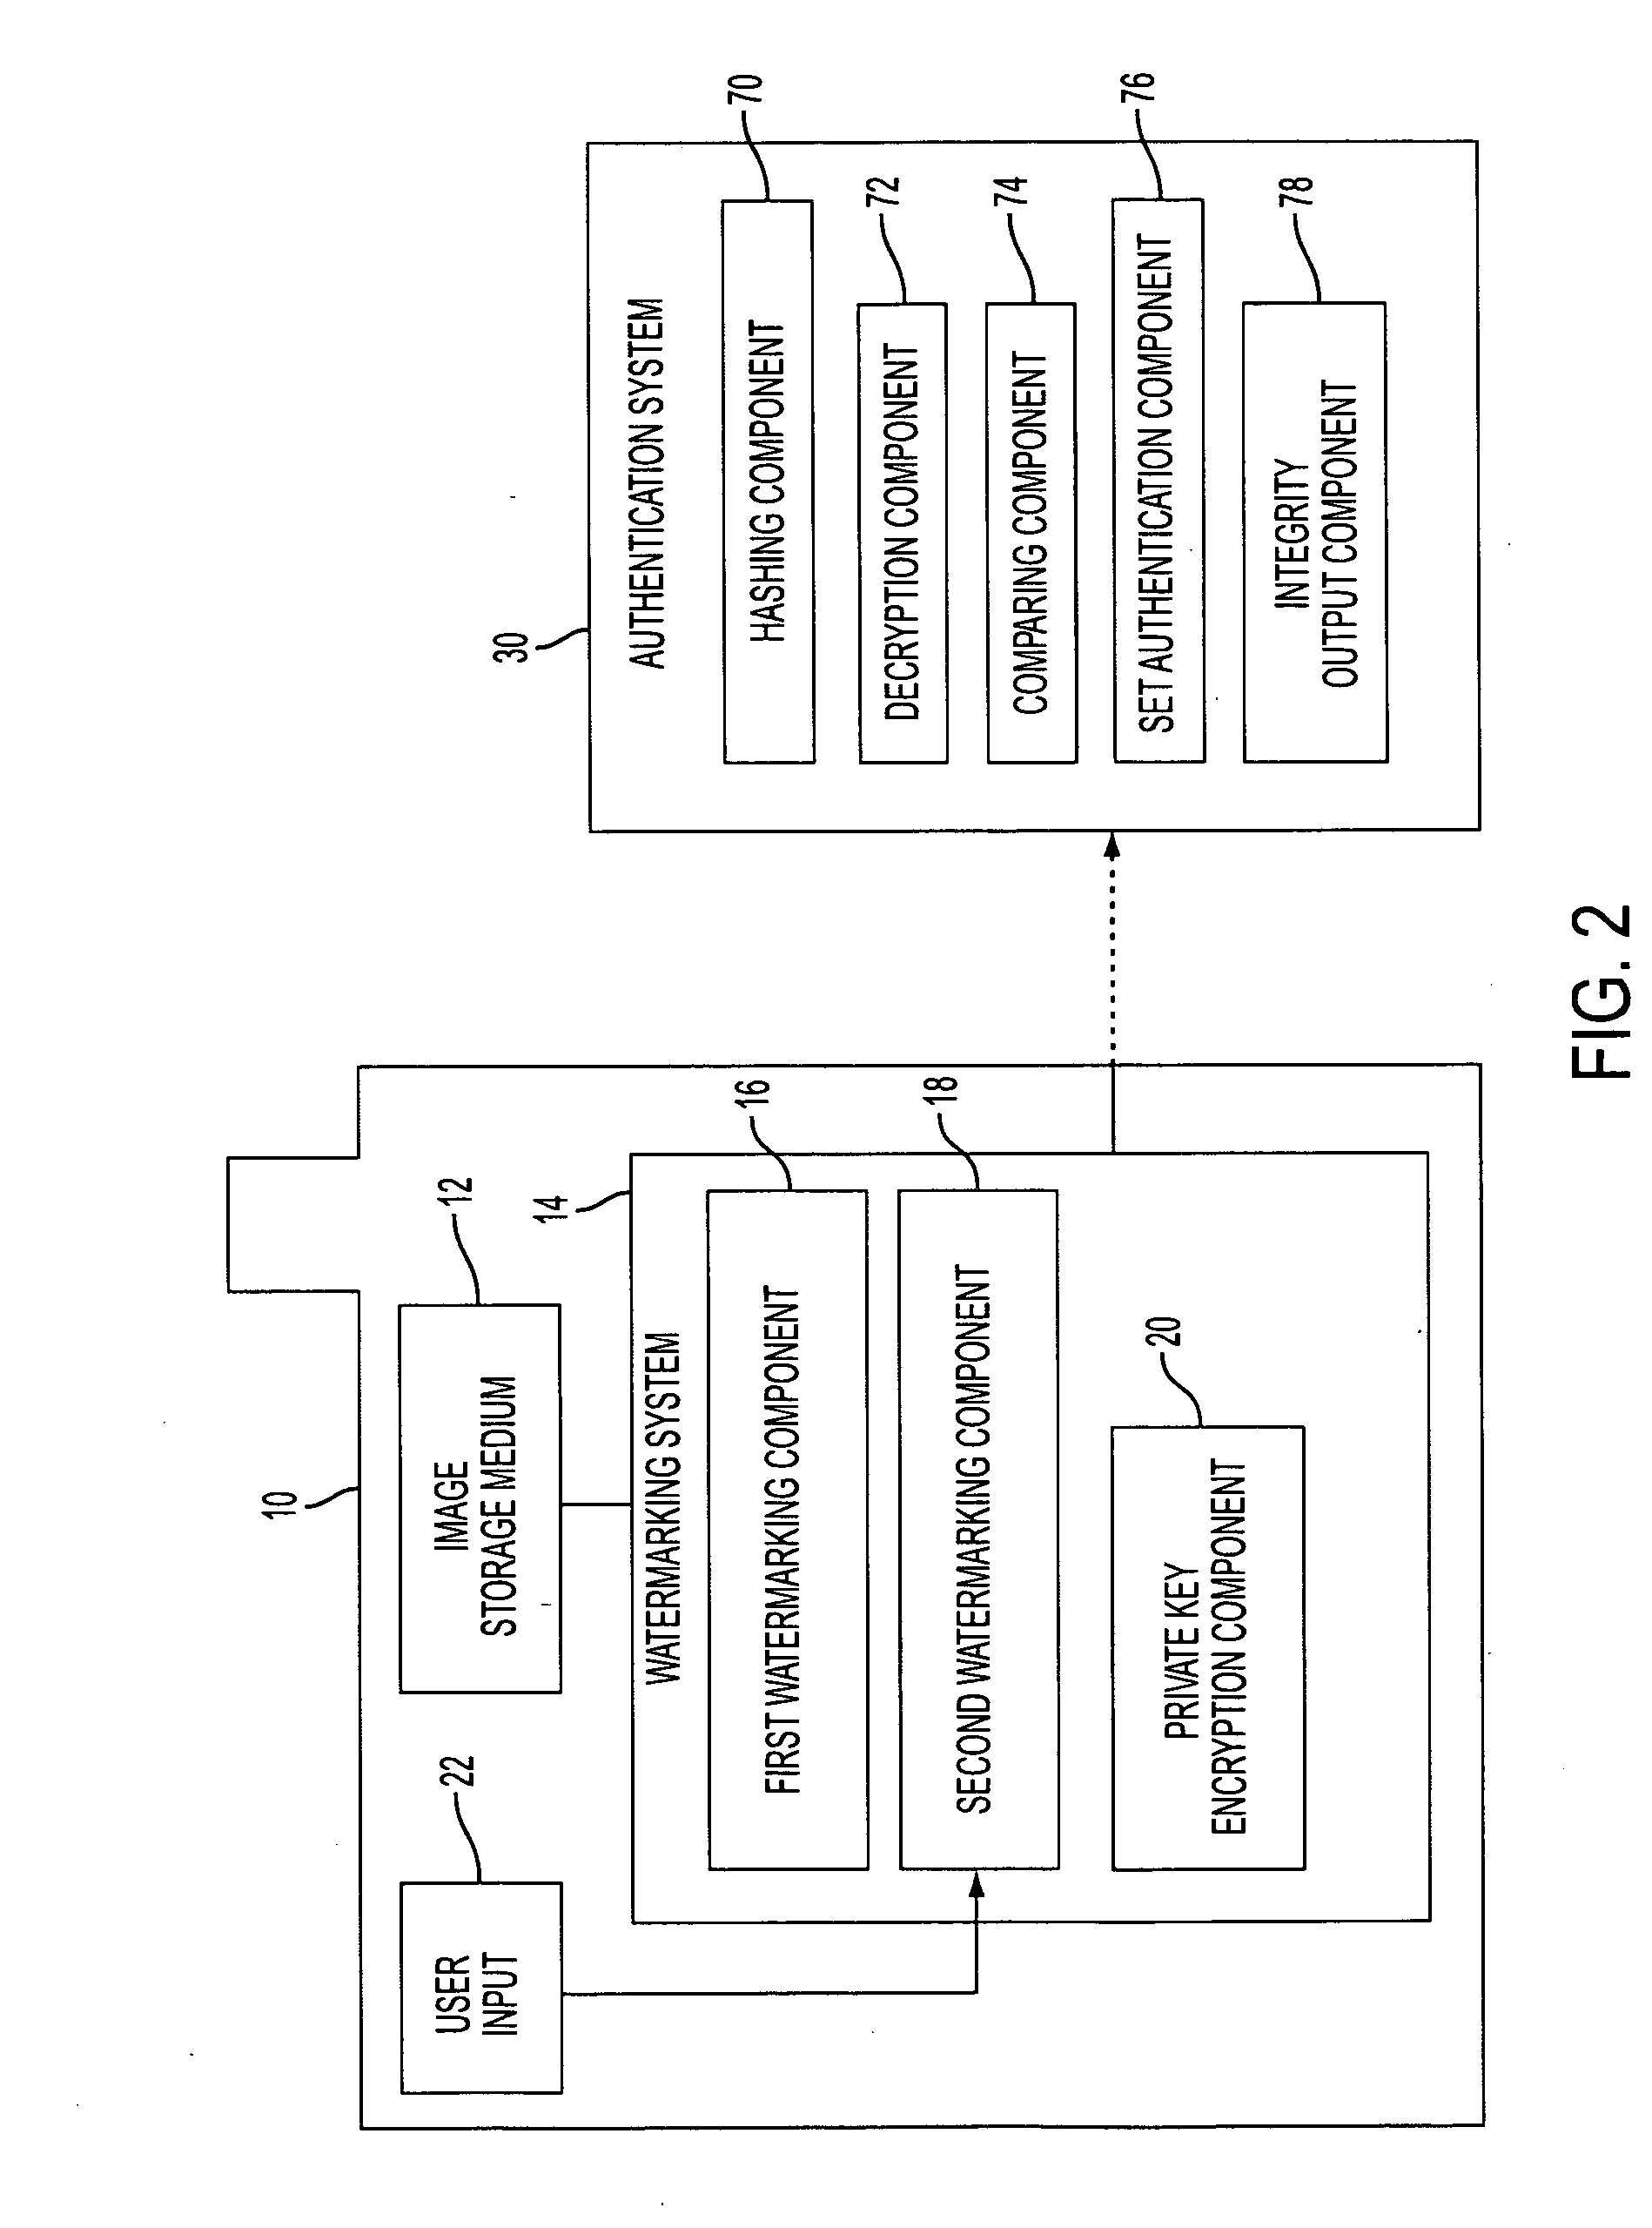 Method for ensuring the integrity of image sets